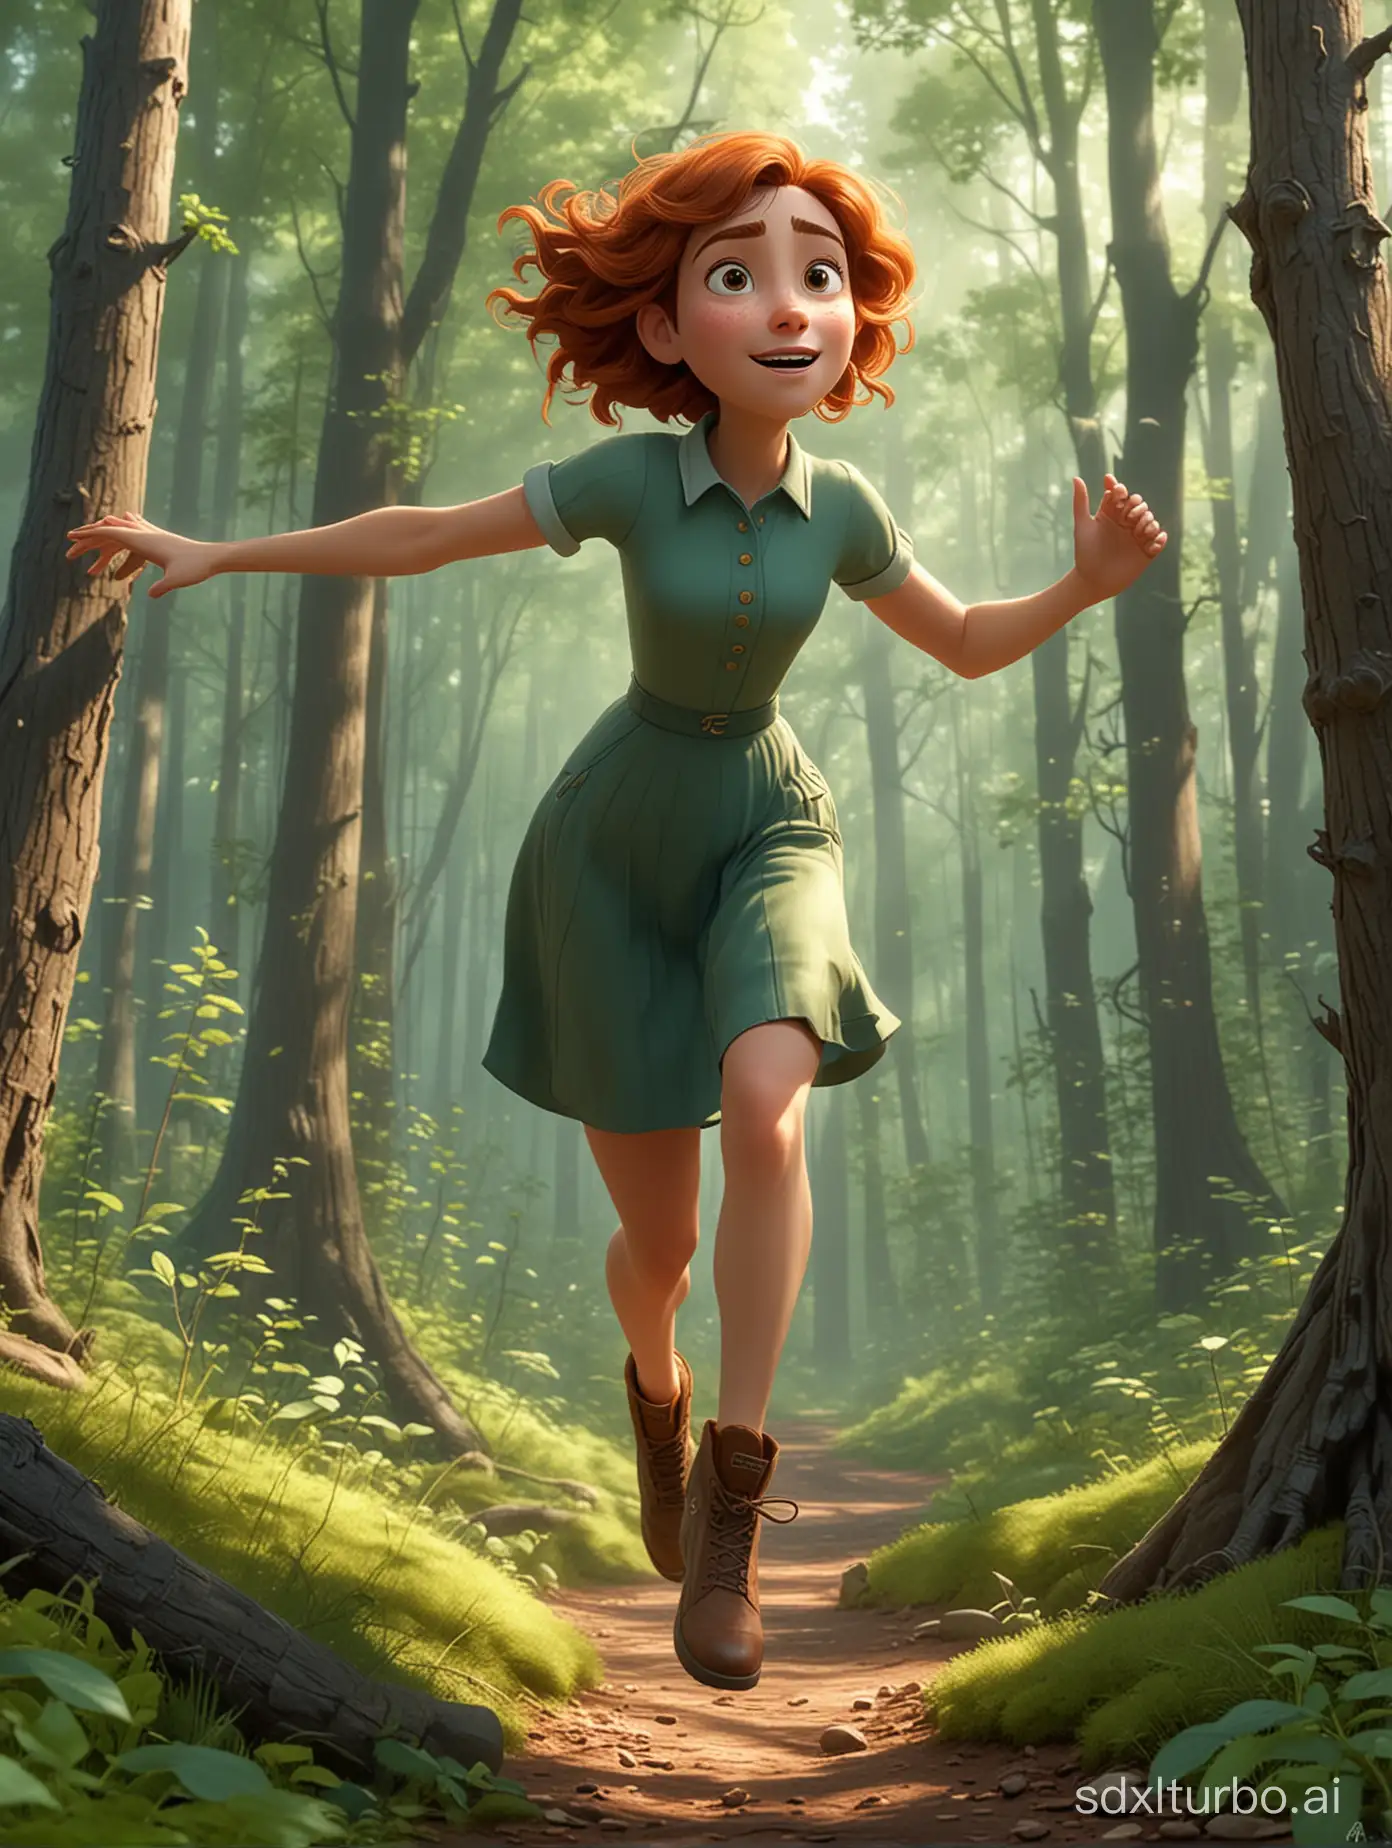 Heroine-Leaping-Through-Enchanted-Woods-in-Pixar-Animation-Style